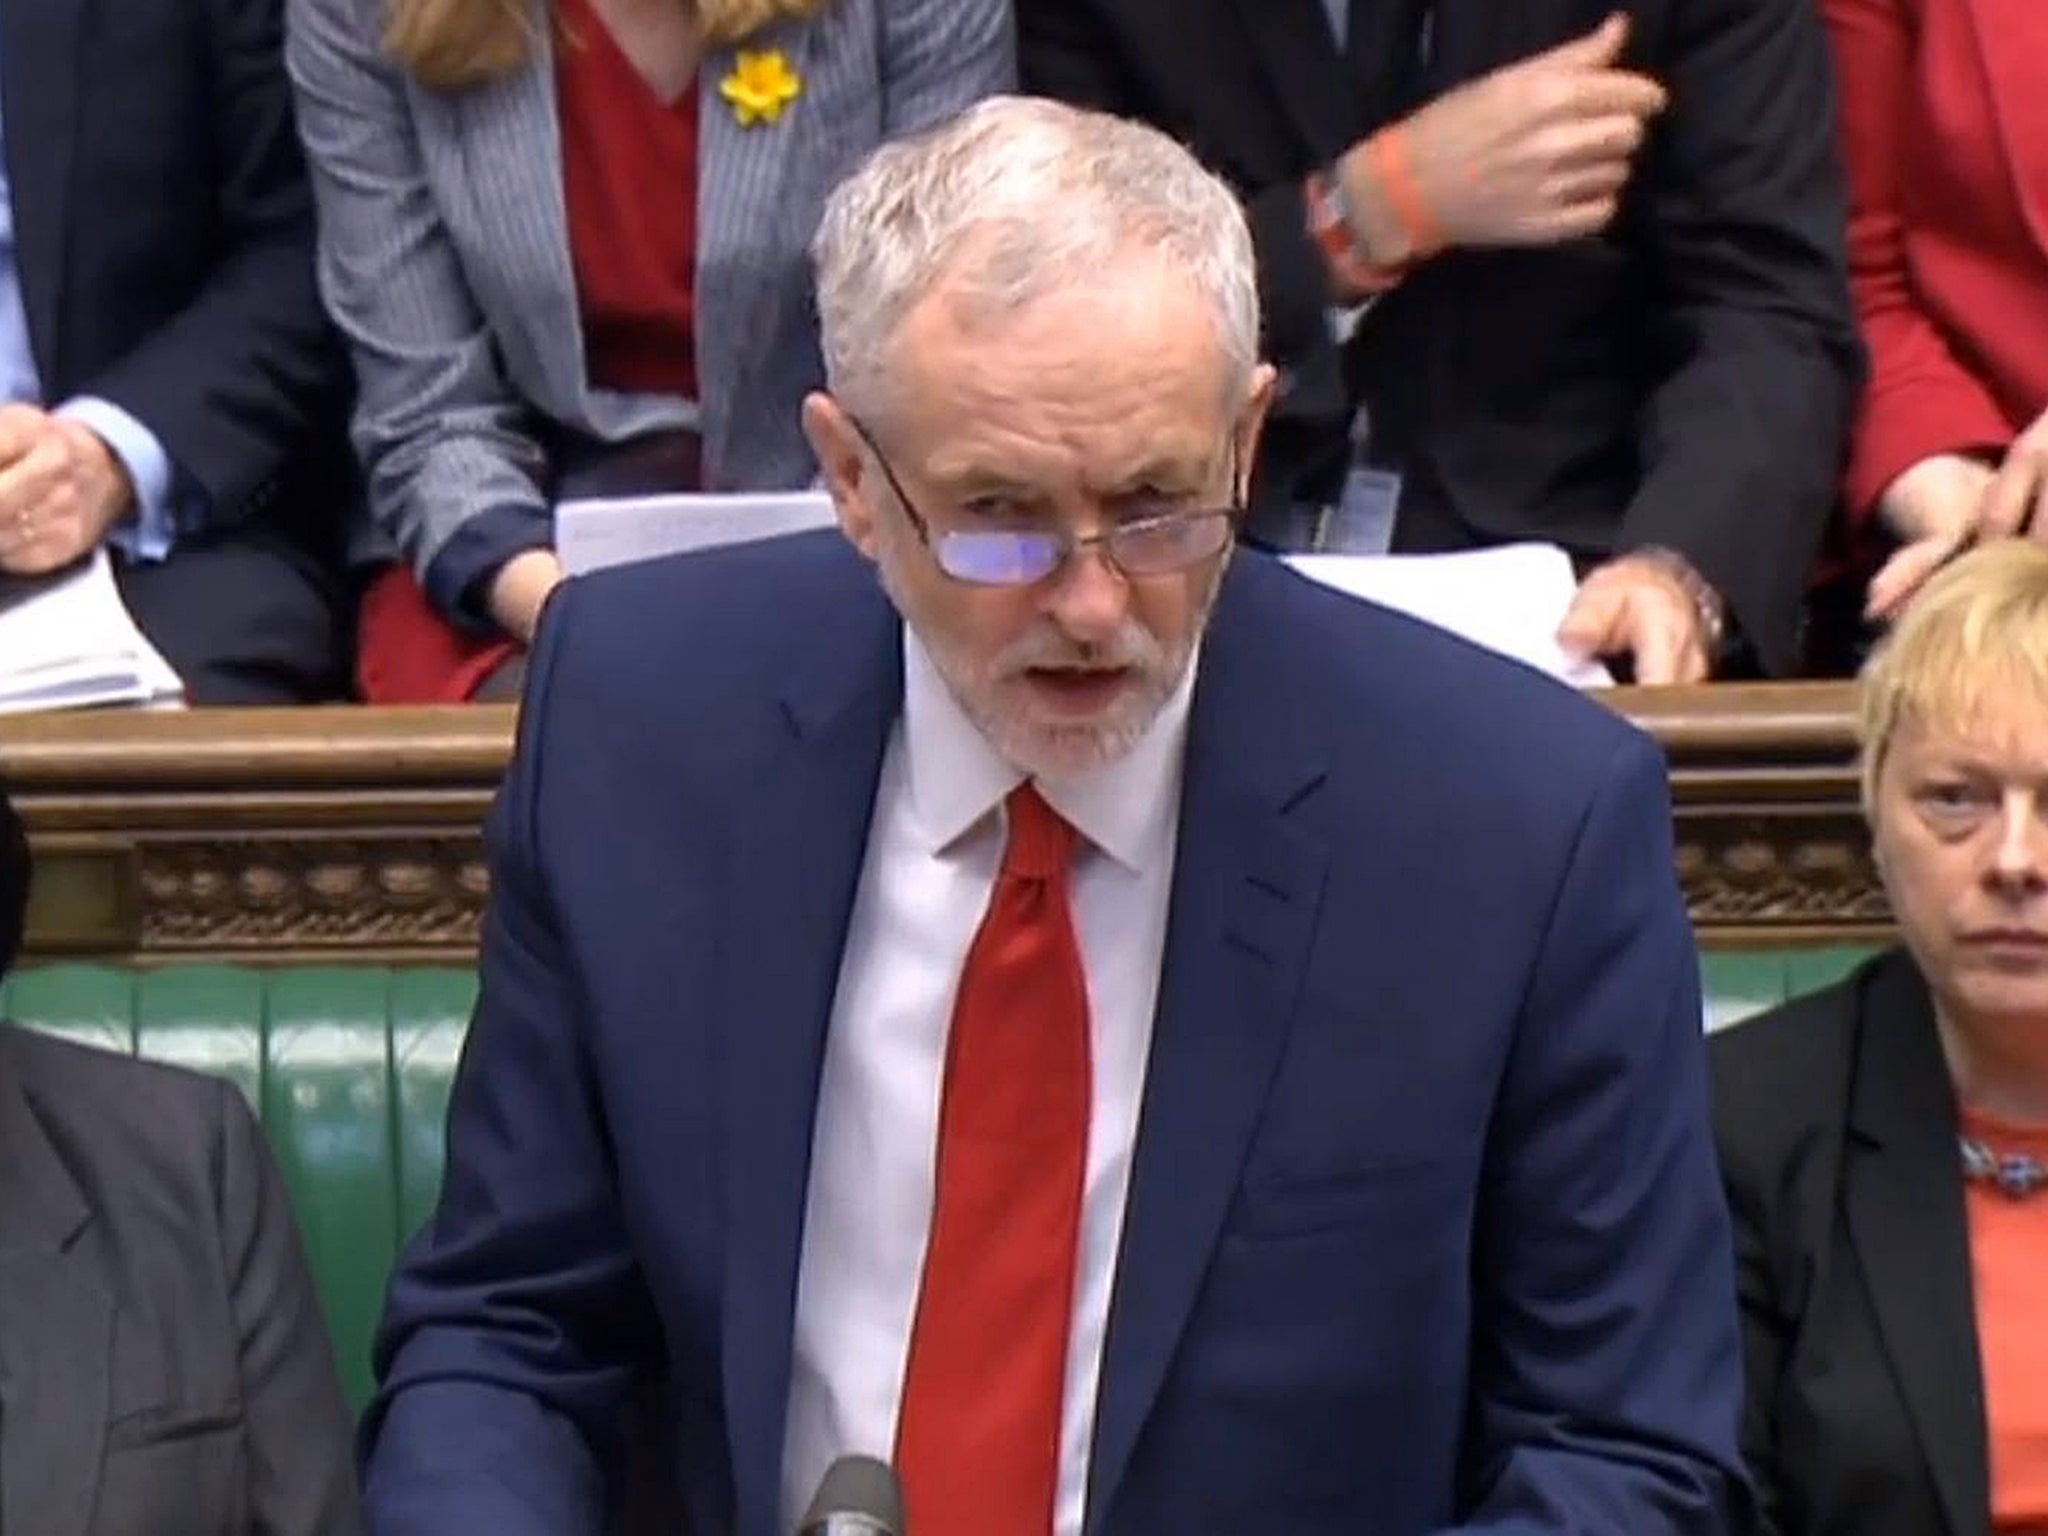 The Labour leader responded to the Chancellor's Budget